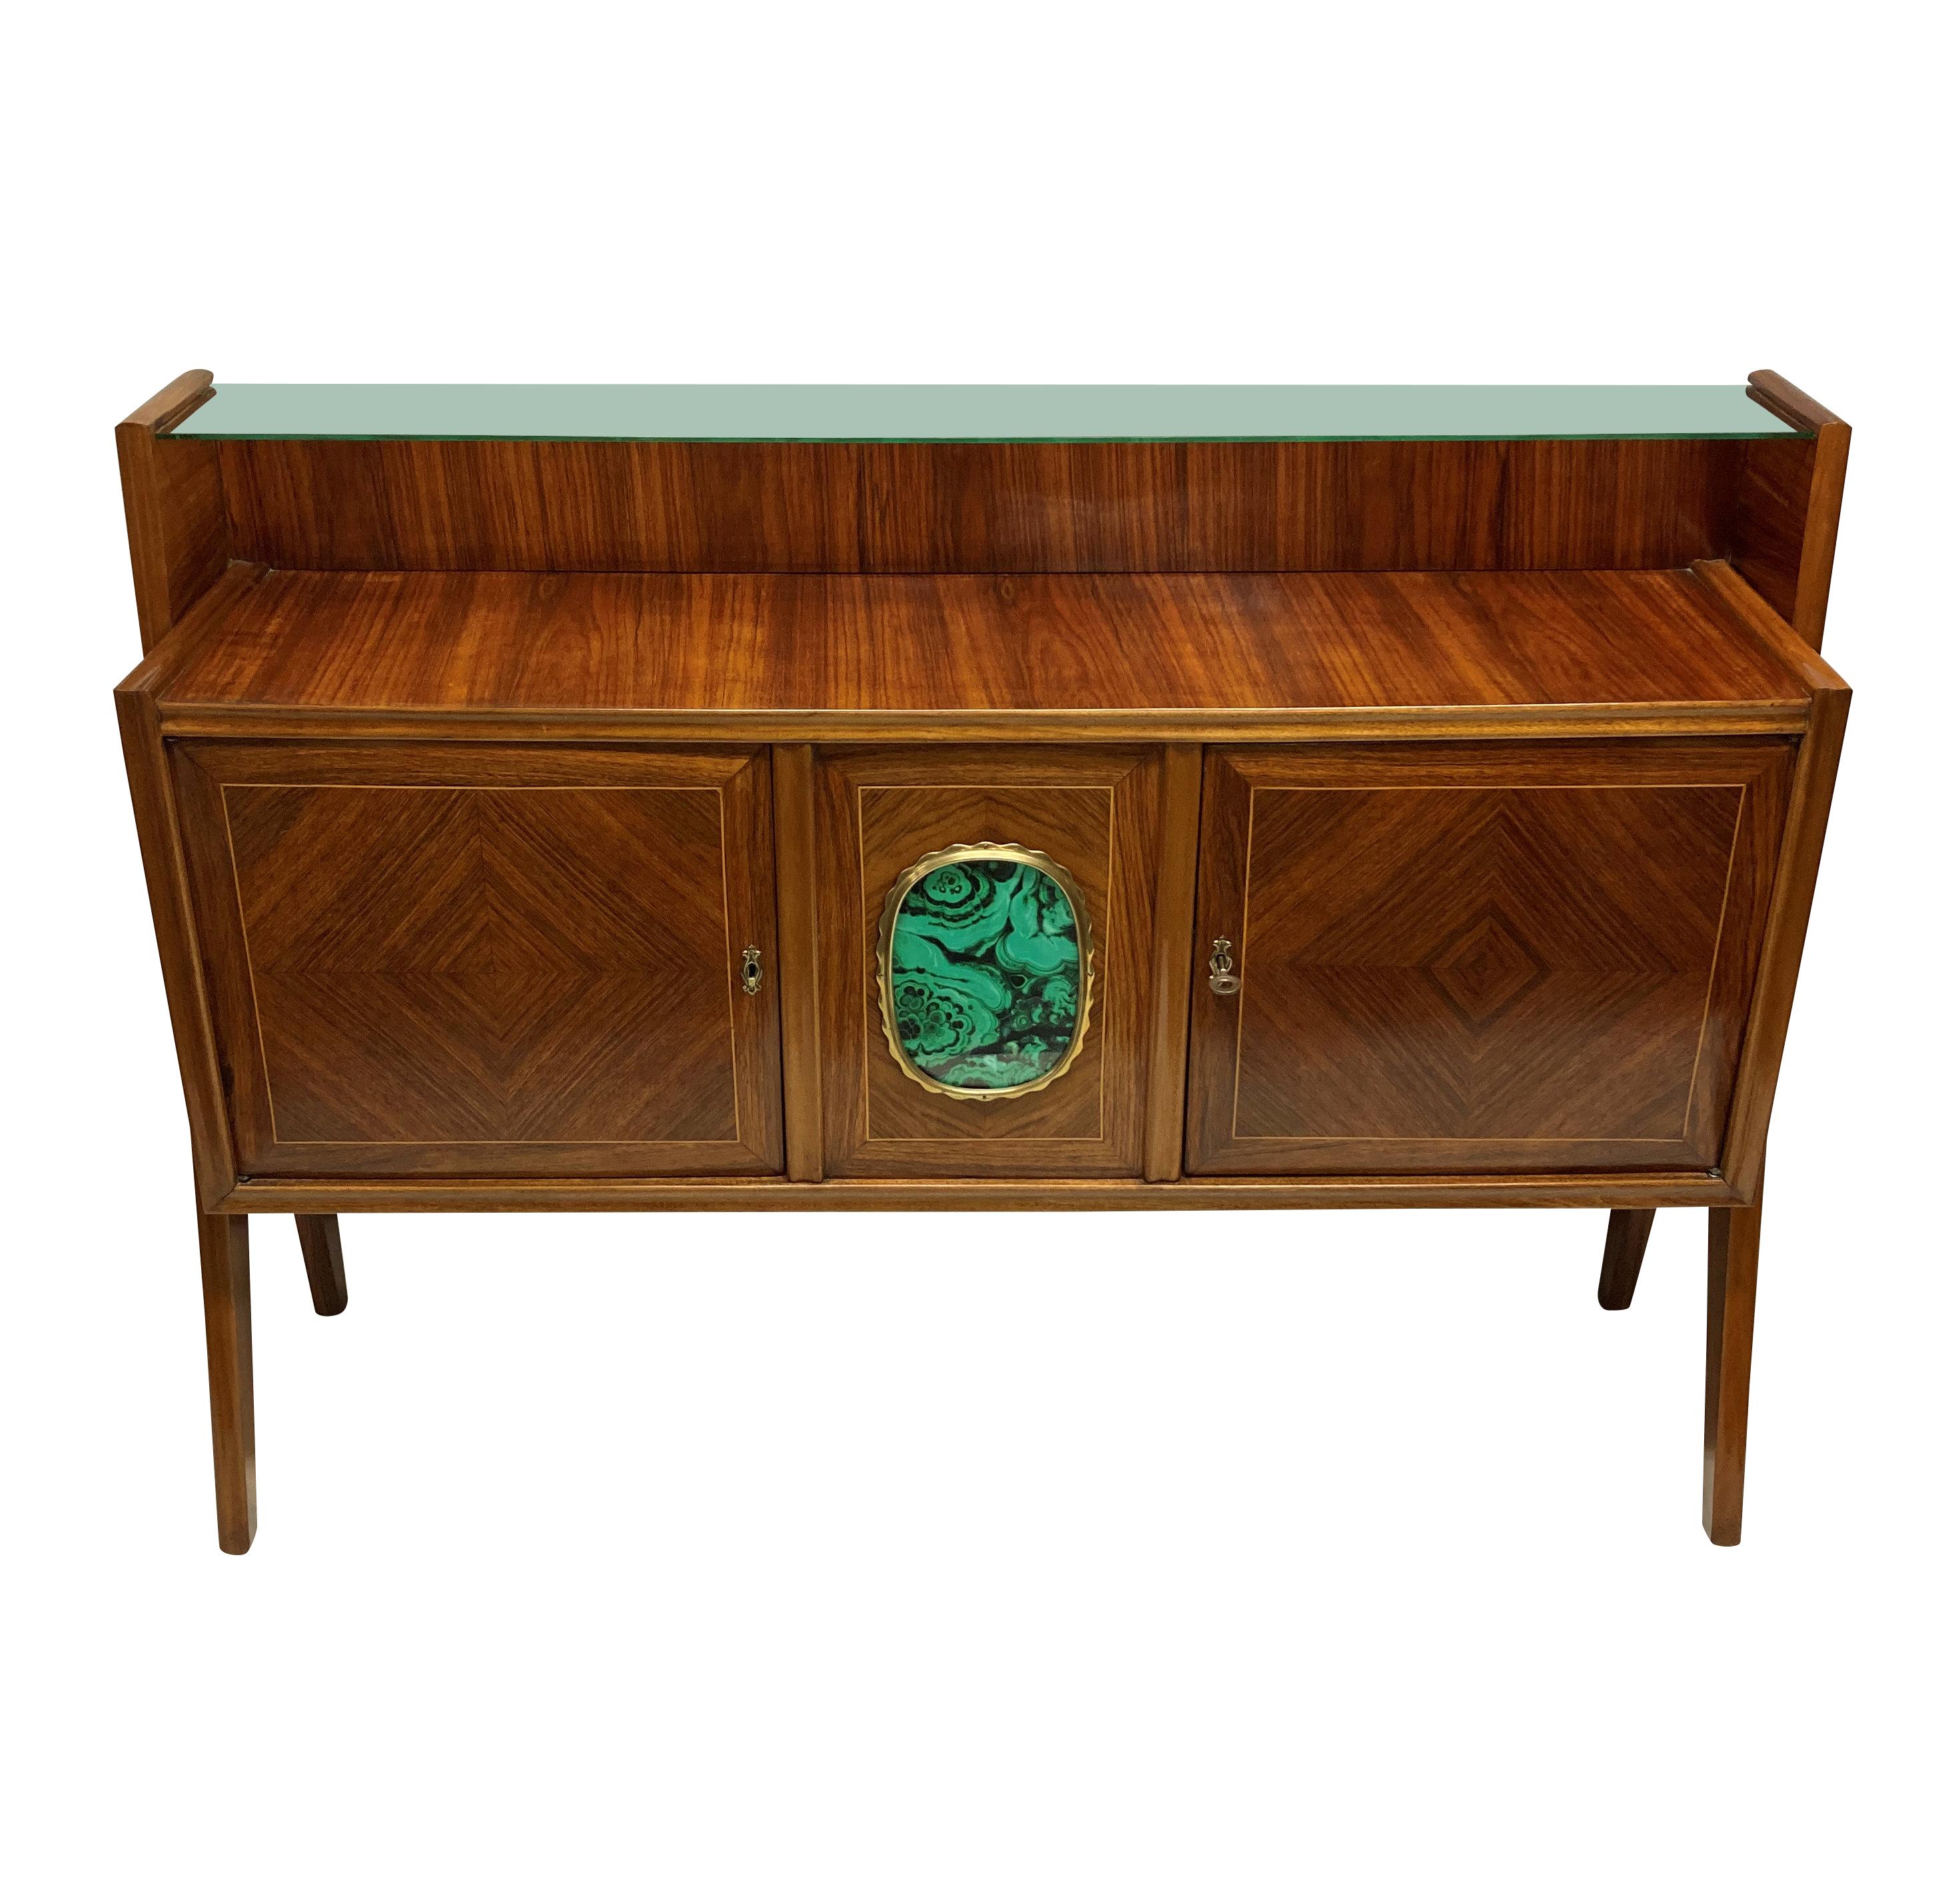 A stylish Italian mid century credenza, beautifully veneered in zebra wood, with a central two door cupboard & upper glass shelf. The central panel with brass detailing and a faux malachite panel, supported each side with architectural legs.